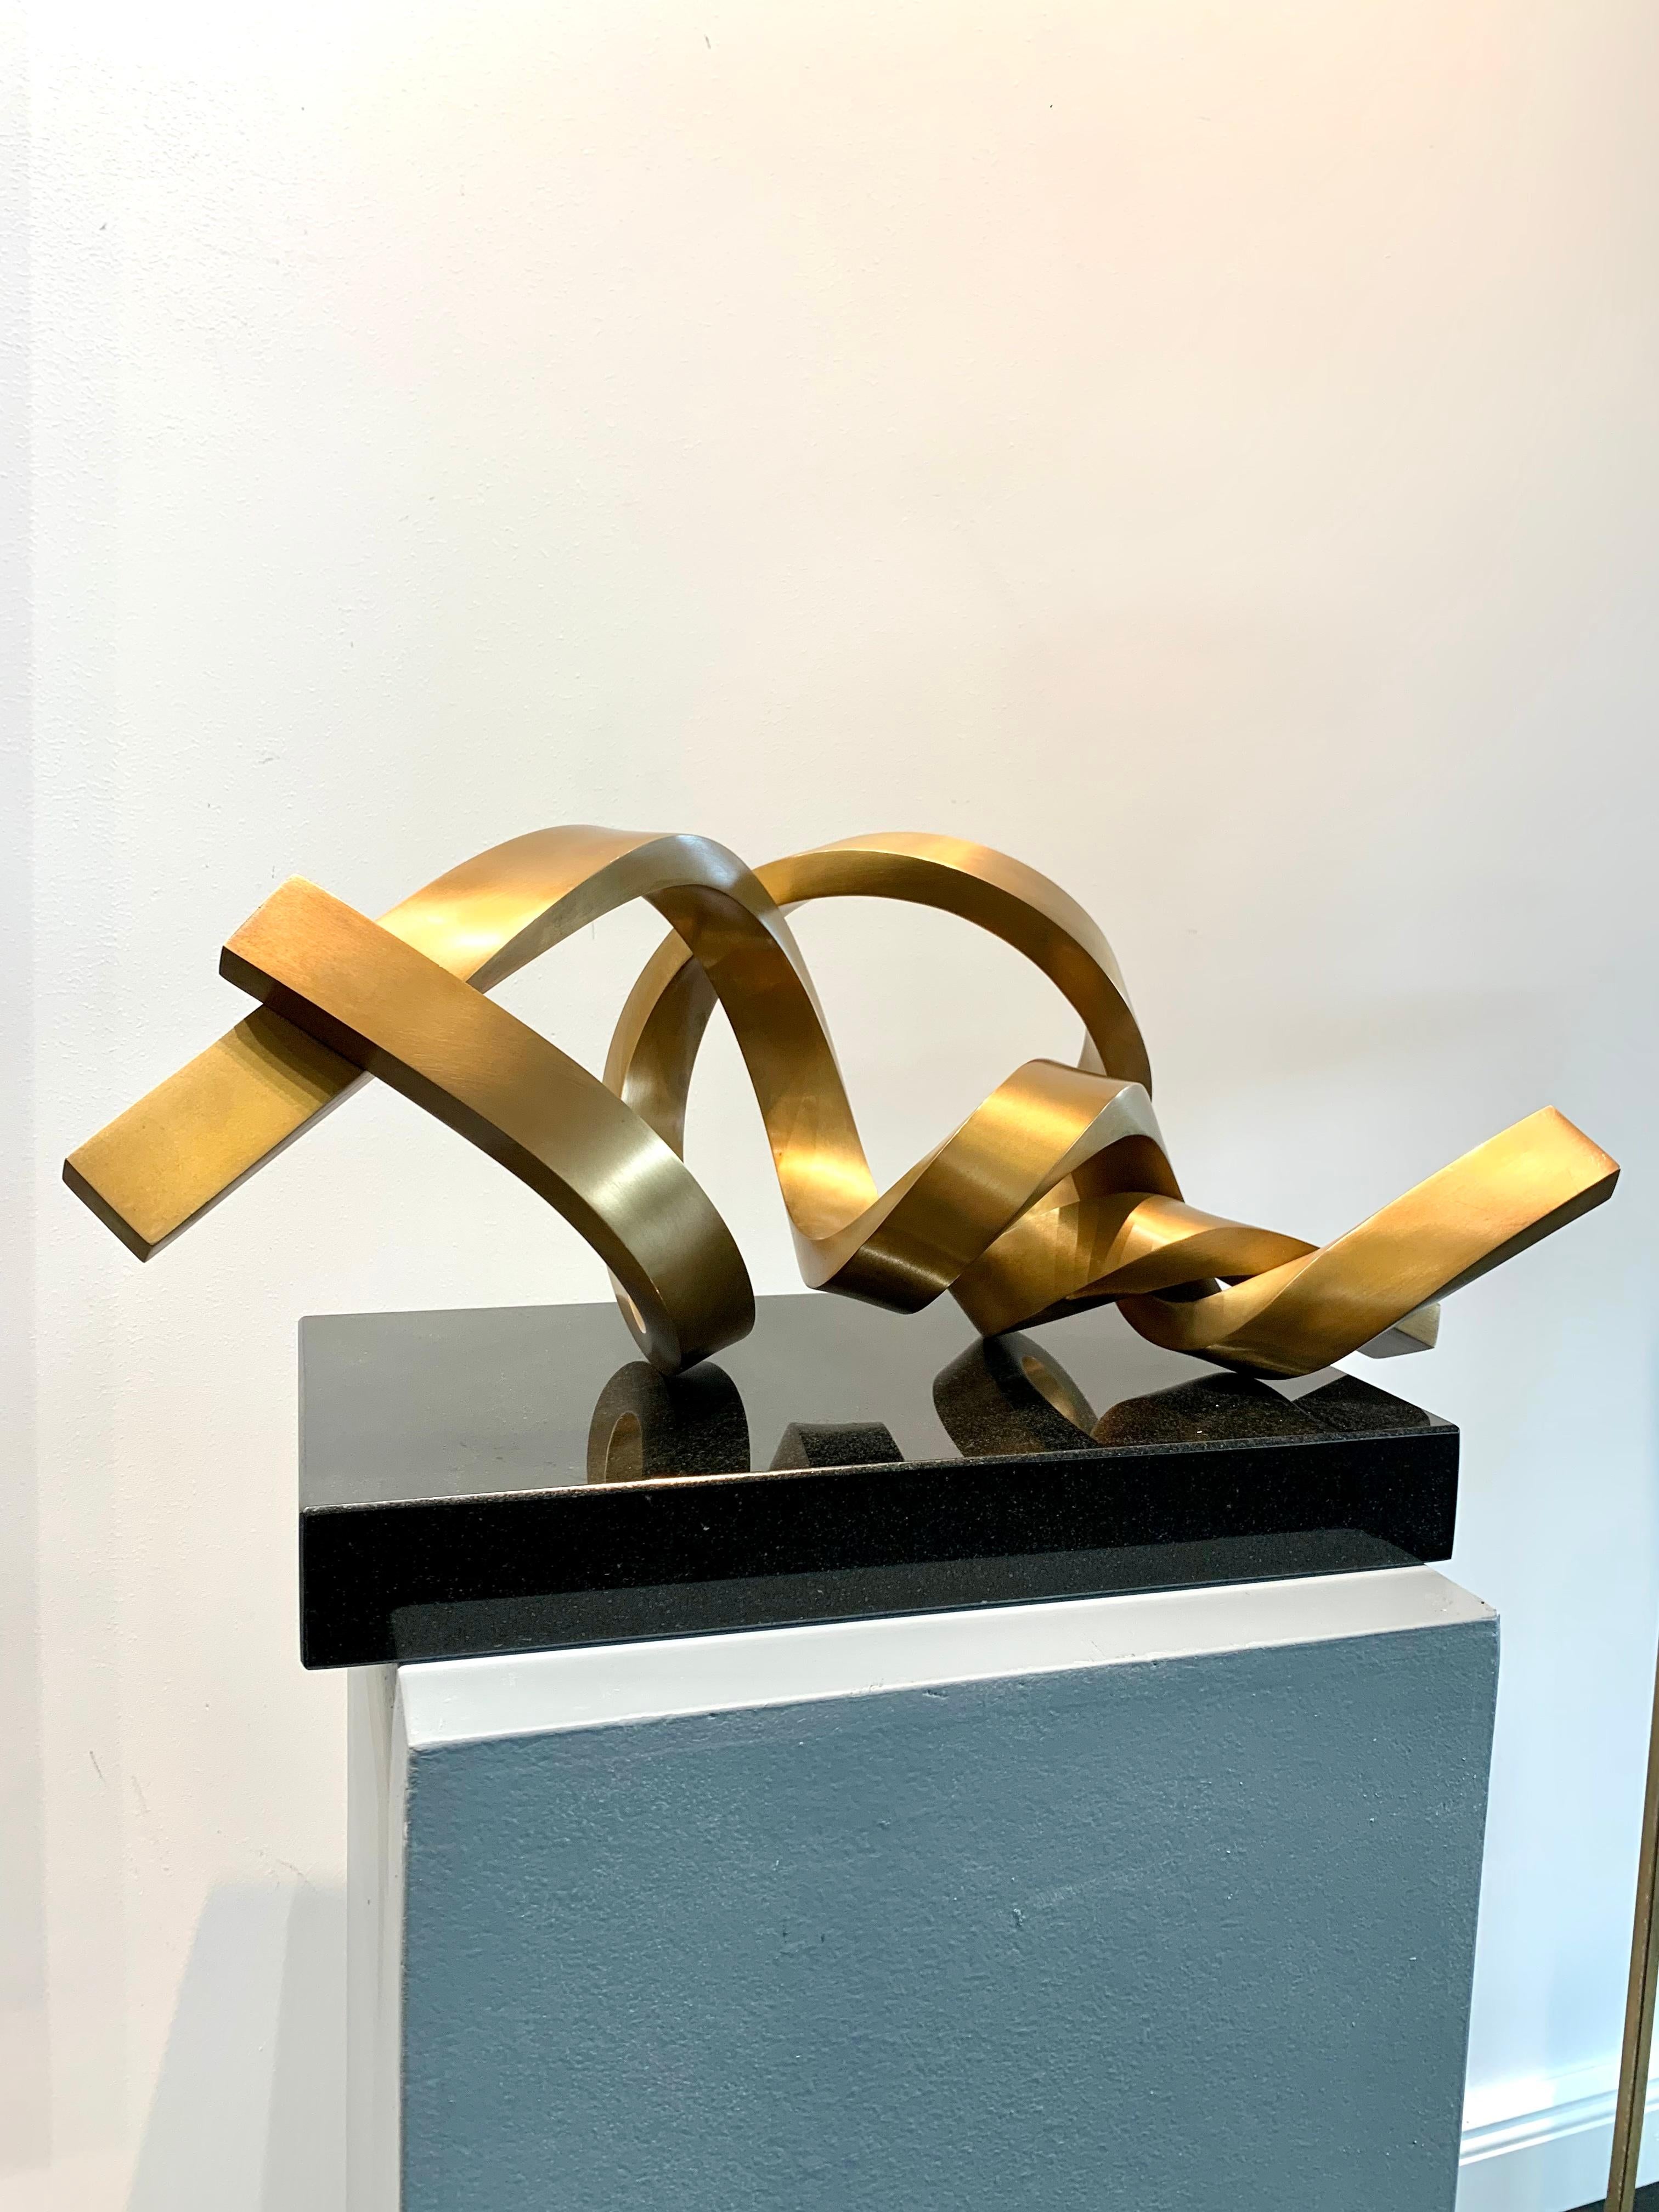 Artist: Kuno Vollet

Title: Infinitum

Materials: Polished Bronze sculpture with a gold patina 

Size:  45cm x 25 cm x 25 cm


About the Gallery:
Folly and Muse was established in 2015 in London to find and collaborate with the most creative,